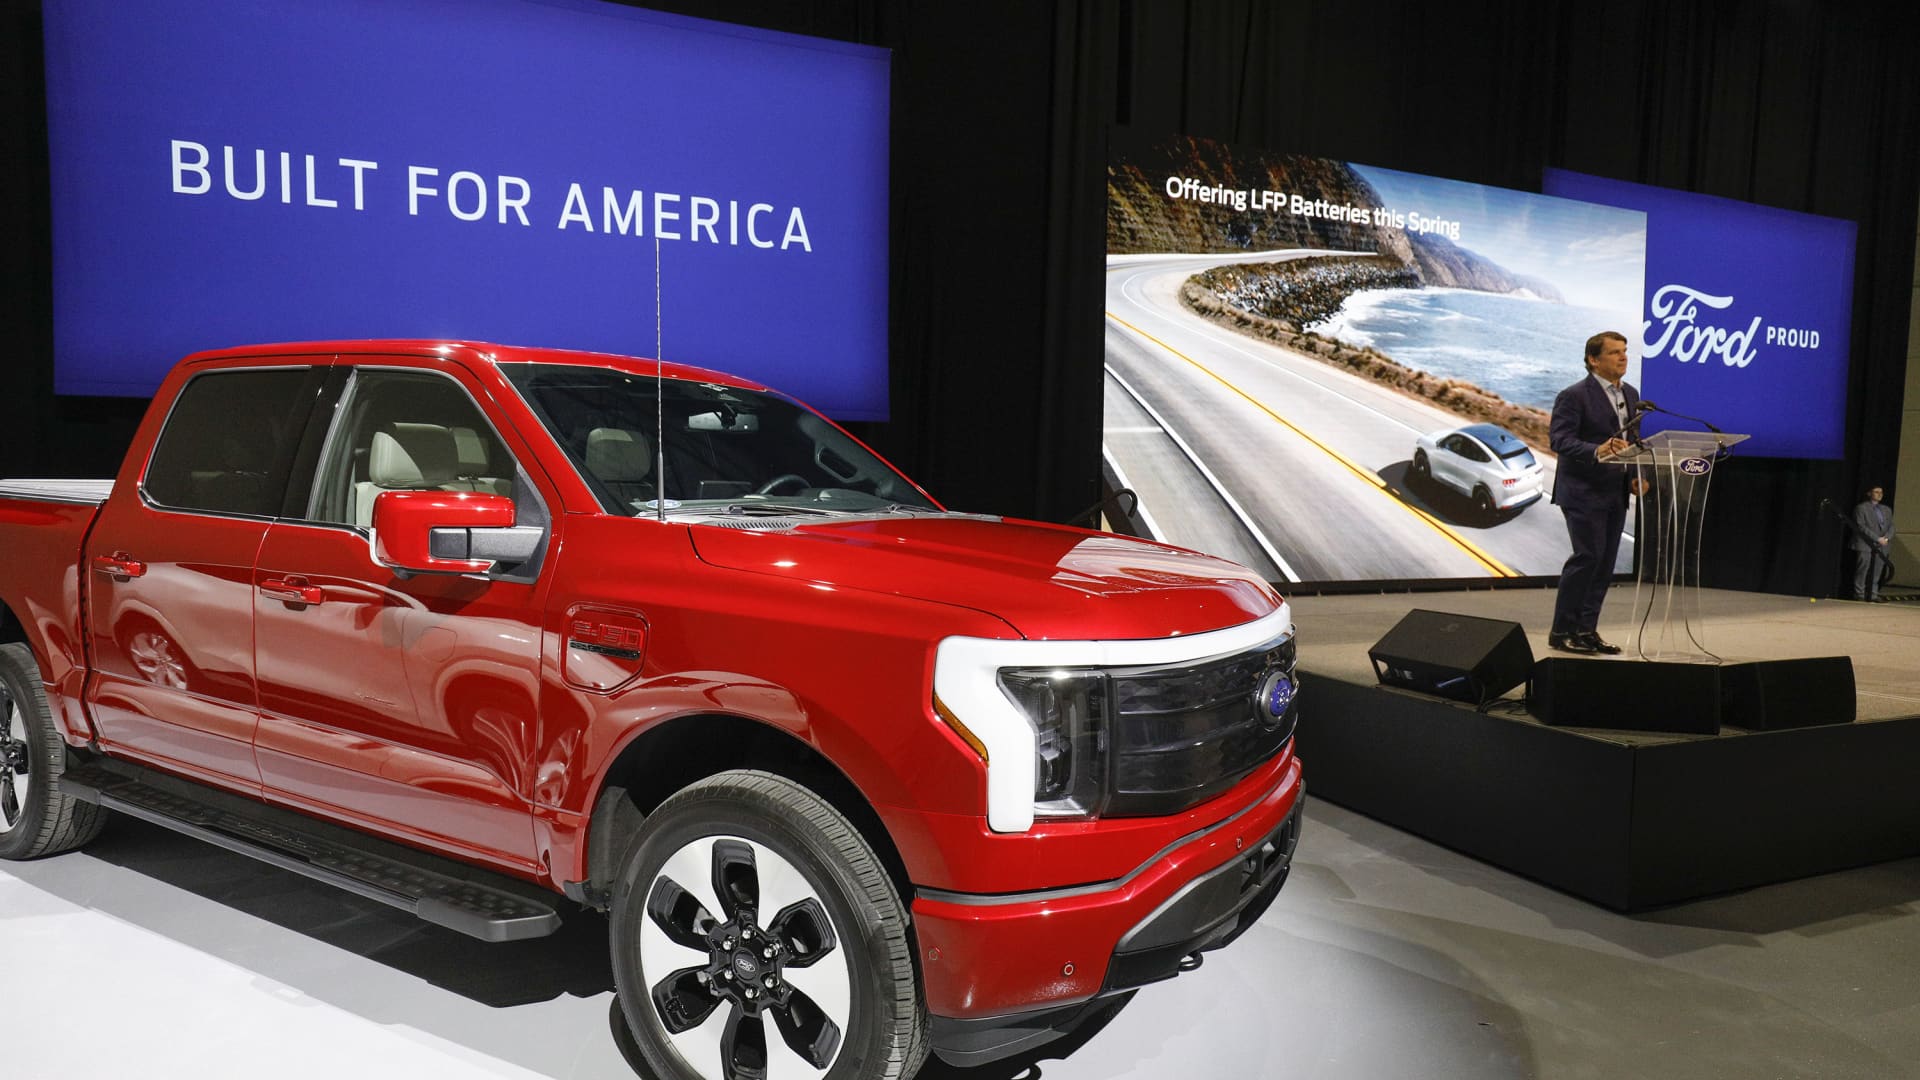 Ford to scale back plans for $3.5 billion Michigan battery plant as EV demand disappoints, labor costs rise Auto Recent